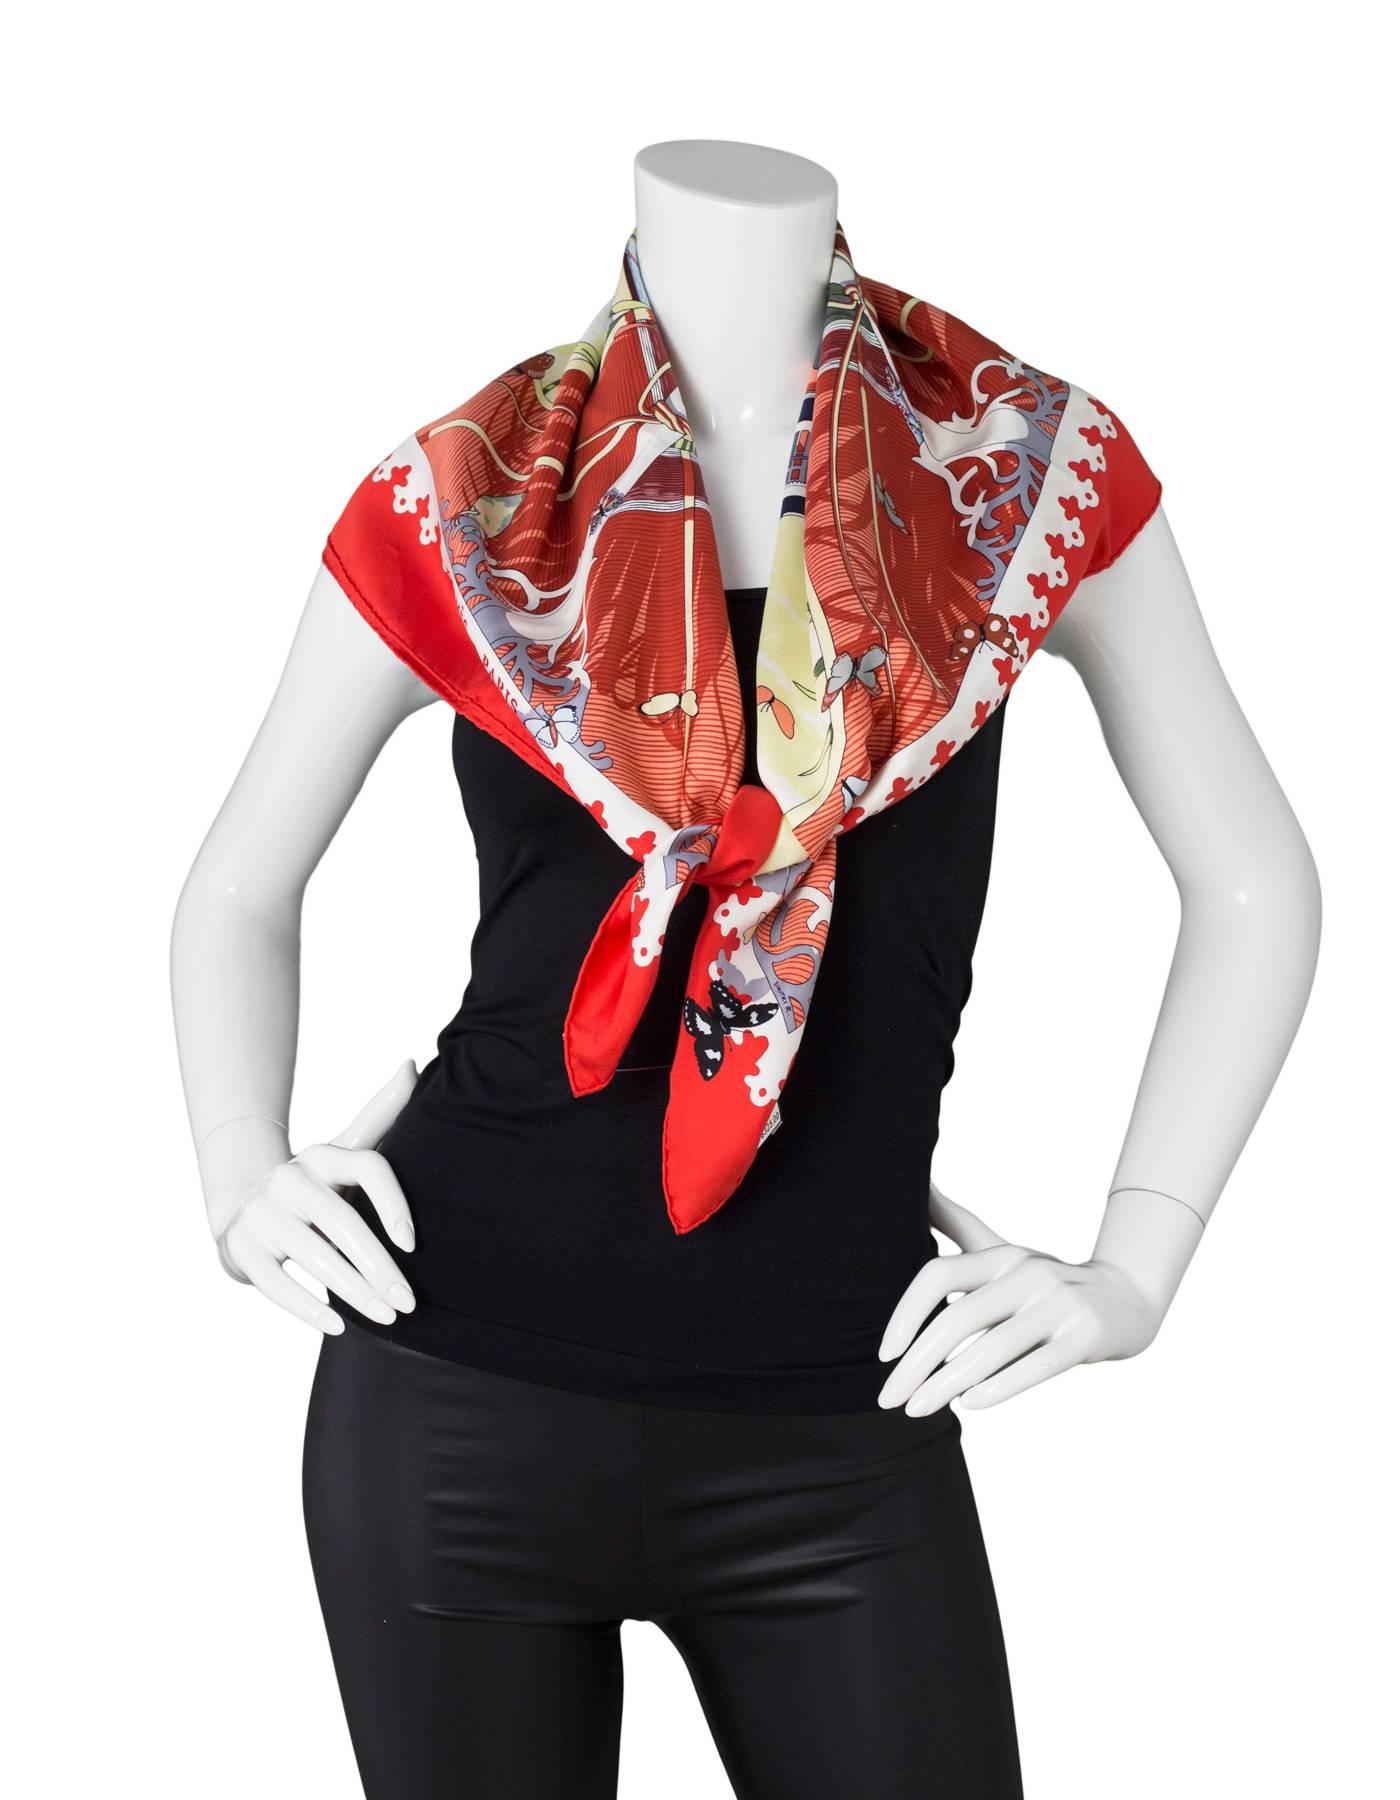 Hermes Varangues Silk 90cm Scarf

Made In: France
Color: Red, orange, white
Composition: 100% Silk
Retail Price: $395 + tax
Overall Condition: Very good pre-owned condition with the exception of small stains at corners
Included: Hermes